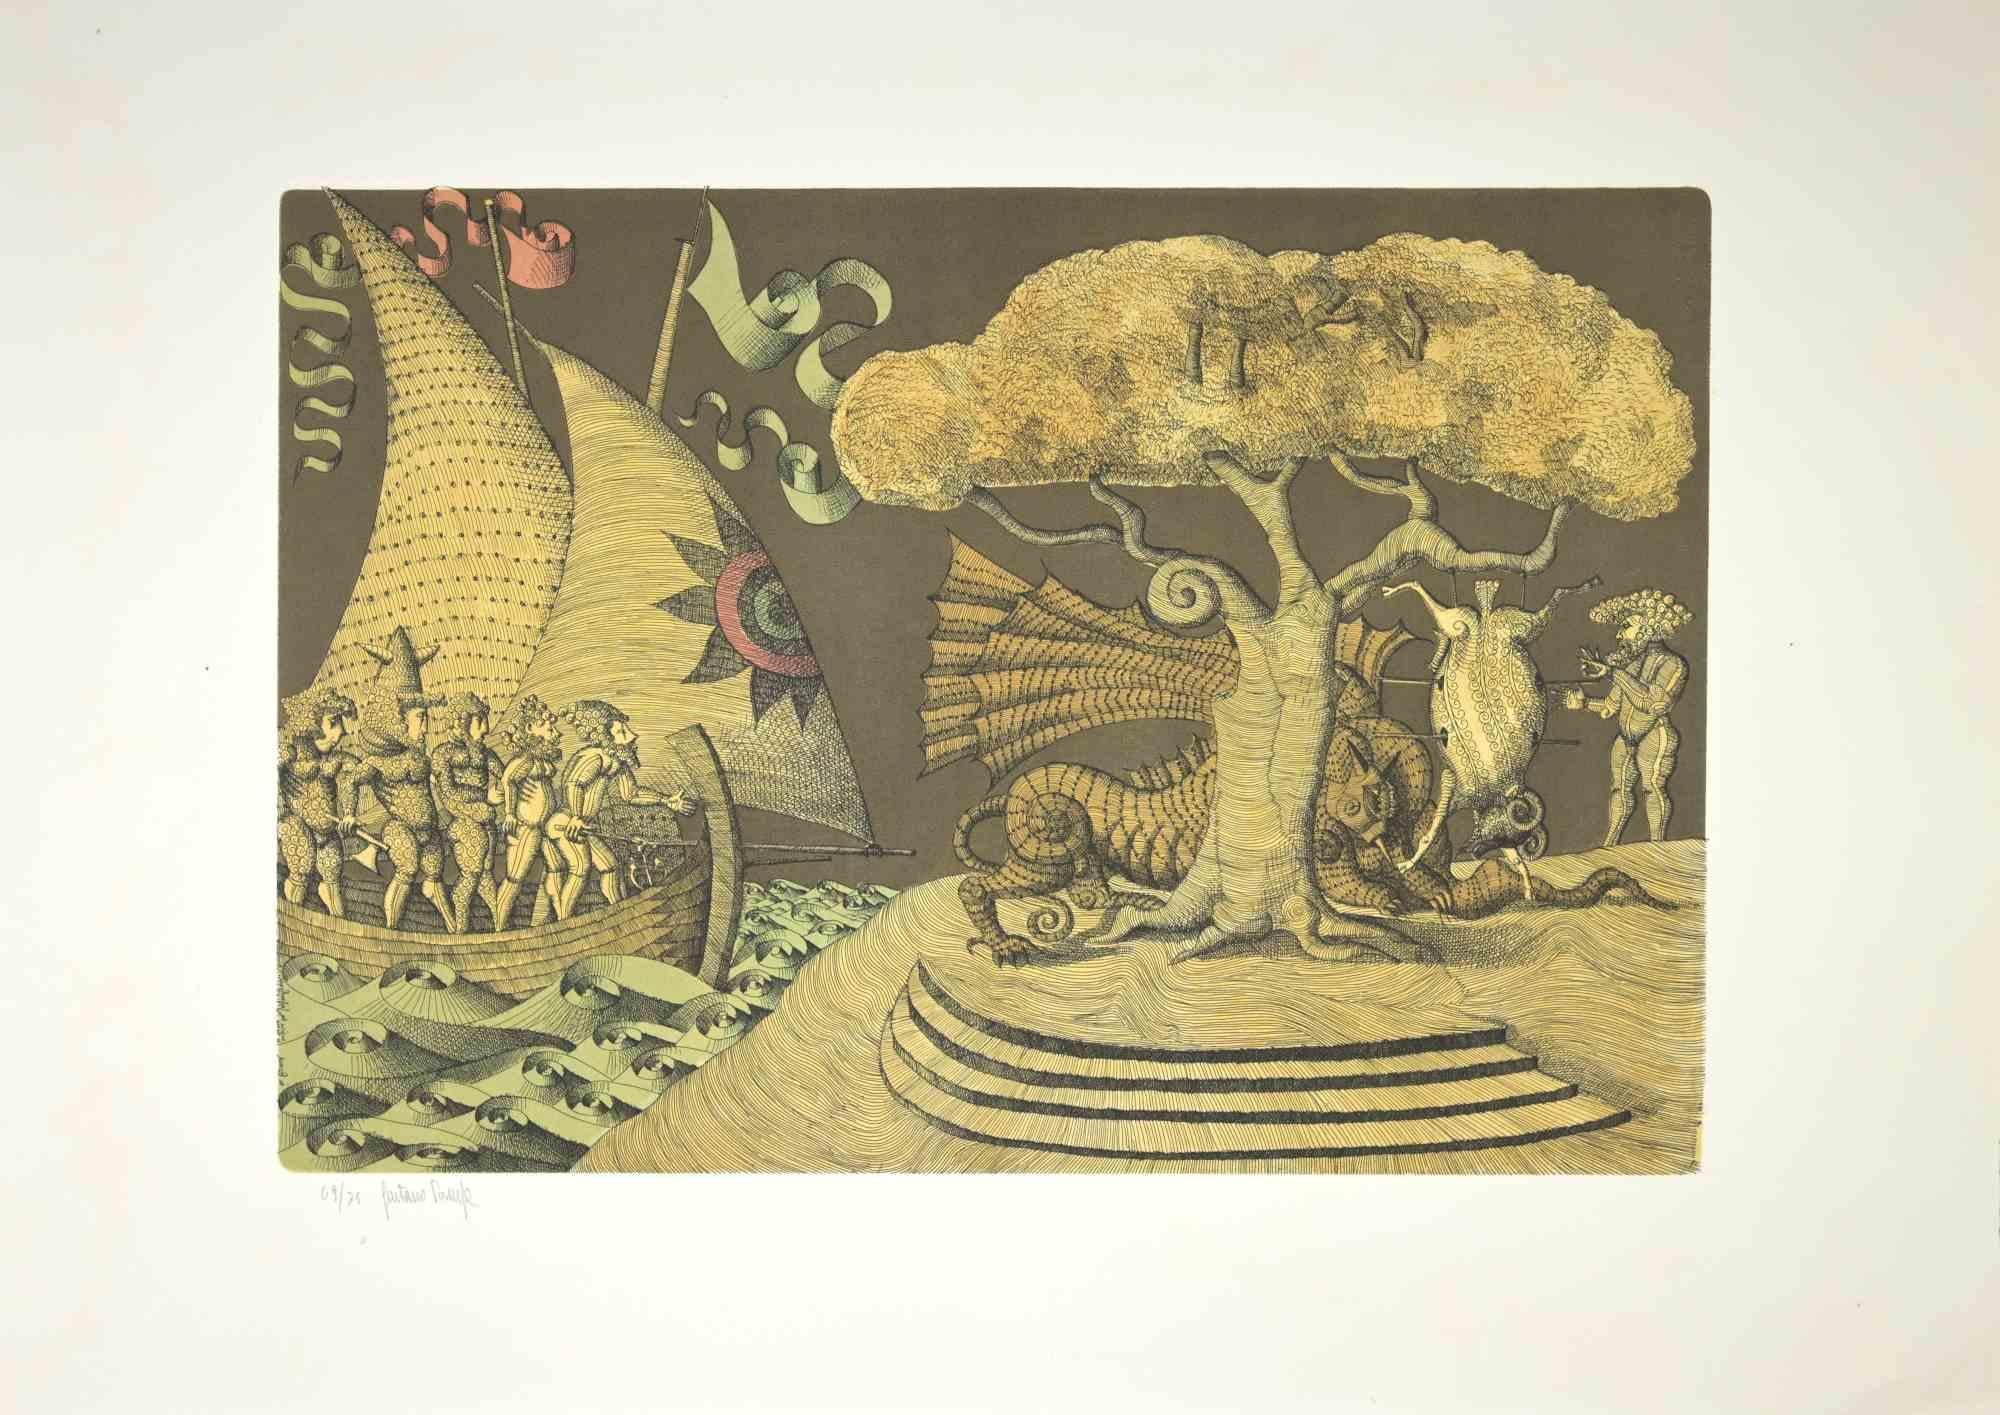 The Visionary Tree  is an artwork realized by Gaetano Pompa (1933, Forenza- 1998) in 1970s.

The artwork is  an aquatint and etching on paper.

Hand signed on the left corner. Edition of 75, numbered, 69. 

Excellent condition.

Gaetano Pompa  was